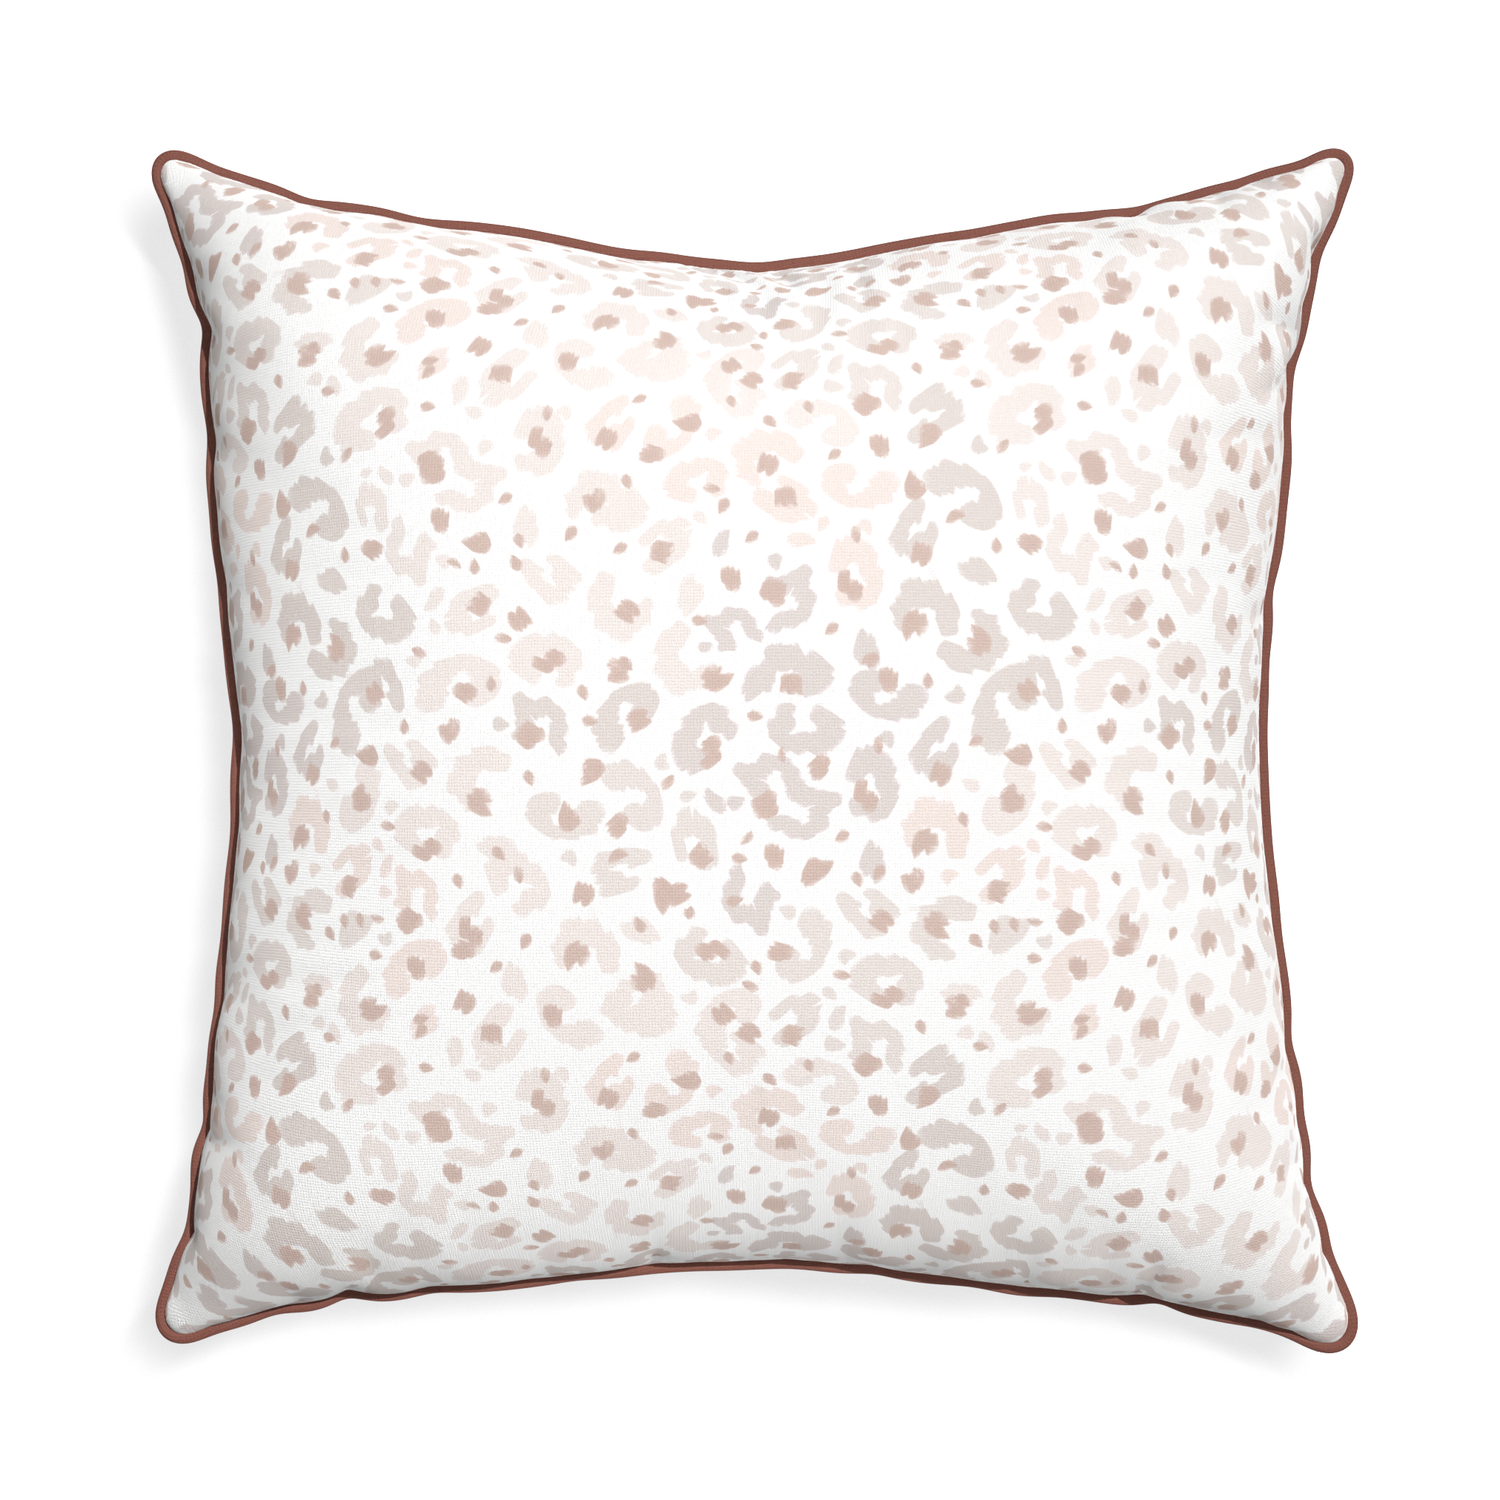 Euro-sham rosie custom pillow with w piping on white background